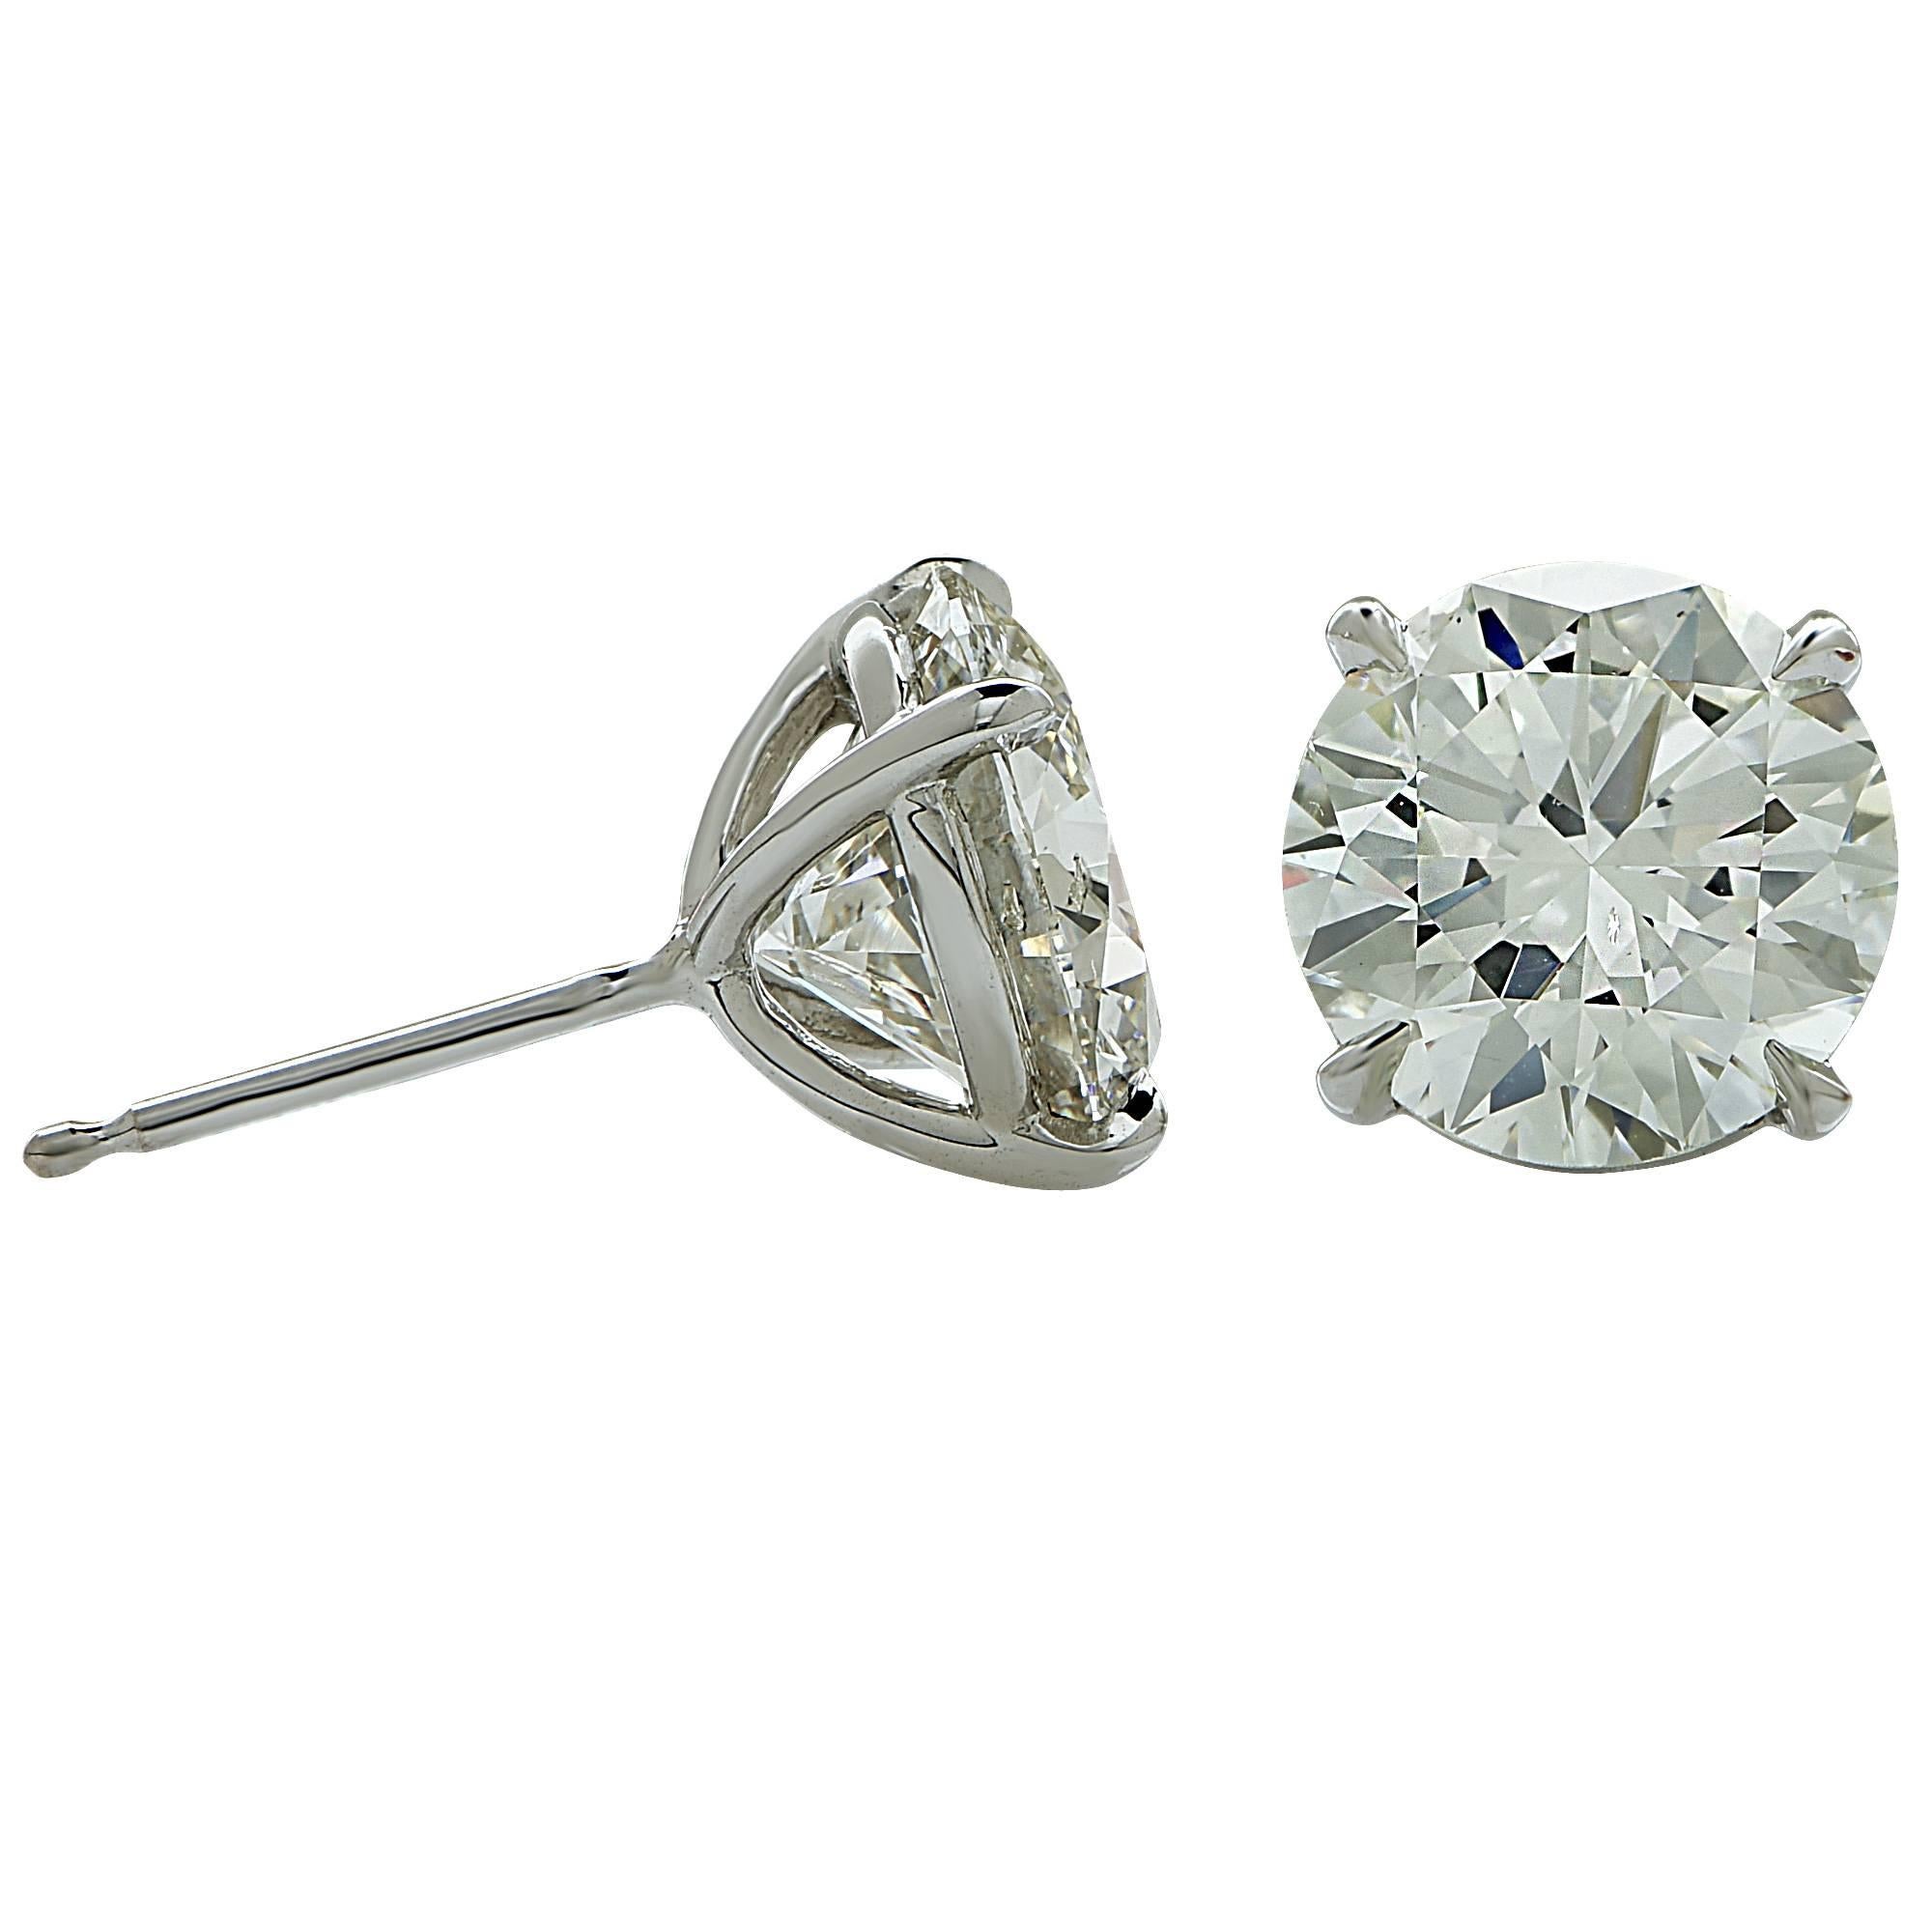 18k white gold earrings featuring a 2.26ct K color Si2 clarity and a 2.14ct K color and SI1 clarity. Both diamonds are accompanied by GIA reports (images attached).

It is stamped and tested as 18k gold.
The metal weight is 1.58 grams.

These